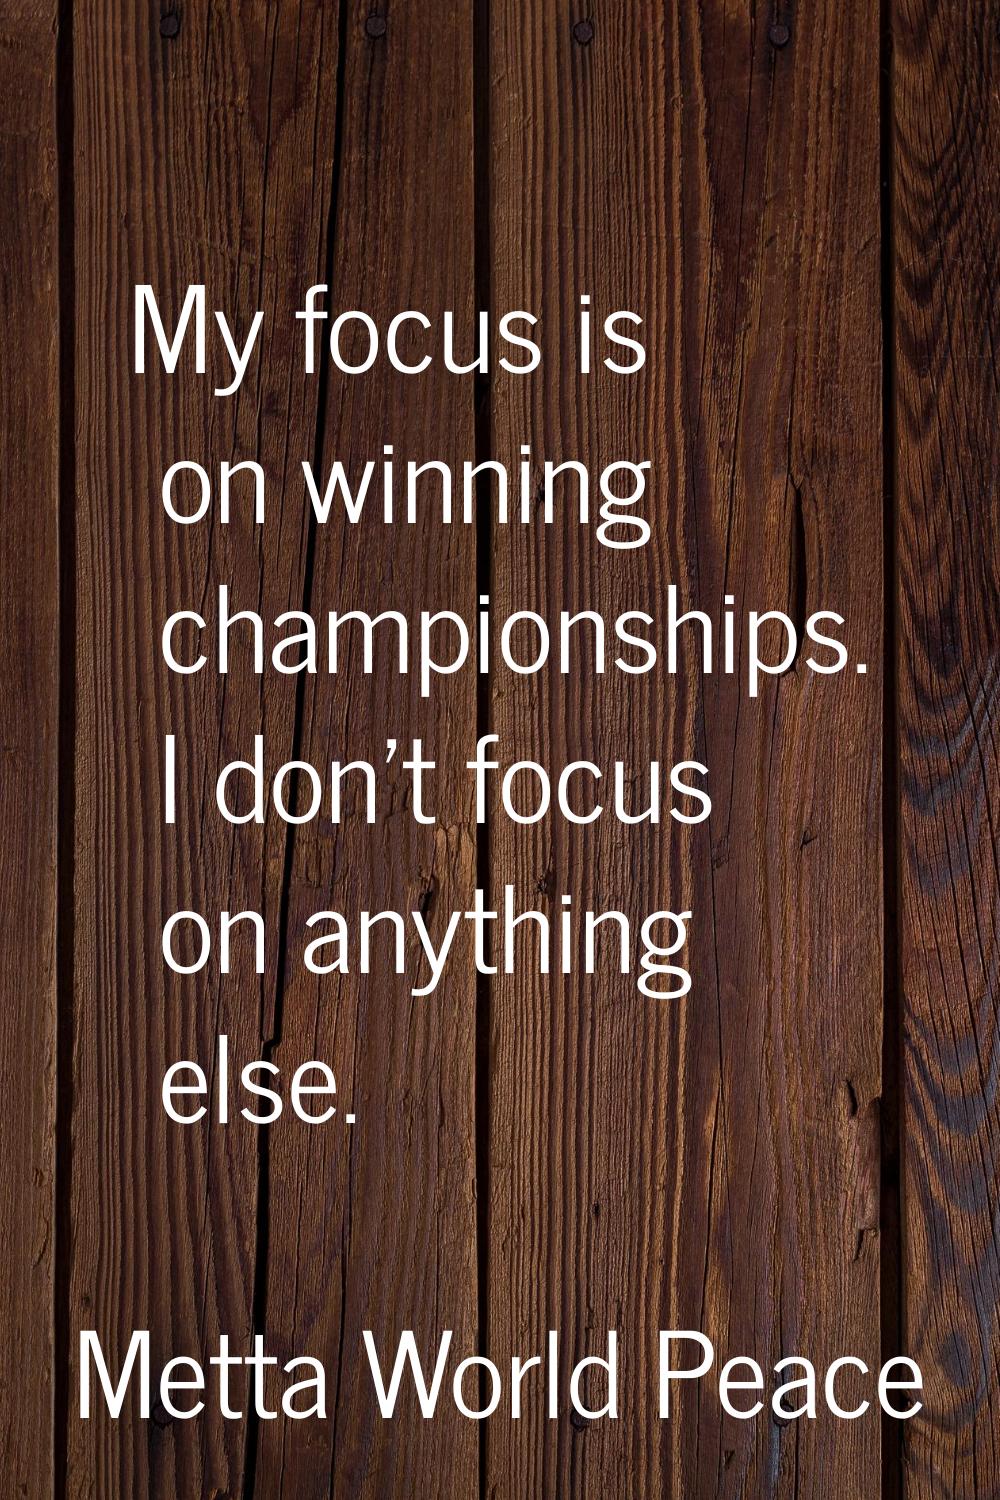 My focus is on winning championships. I don't focus on anything else.